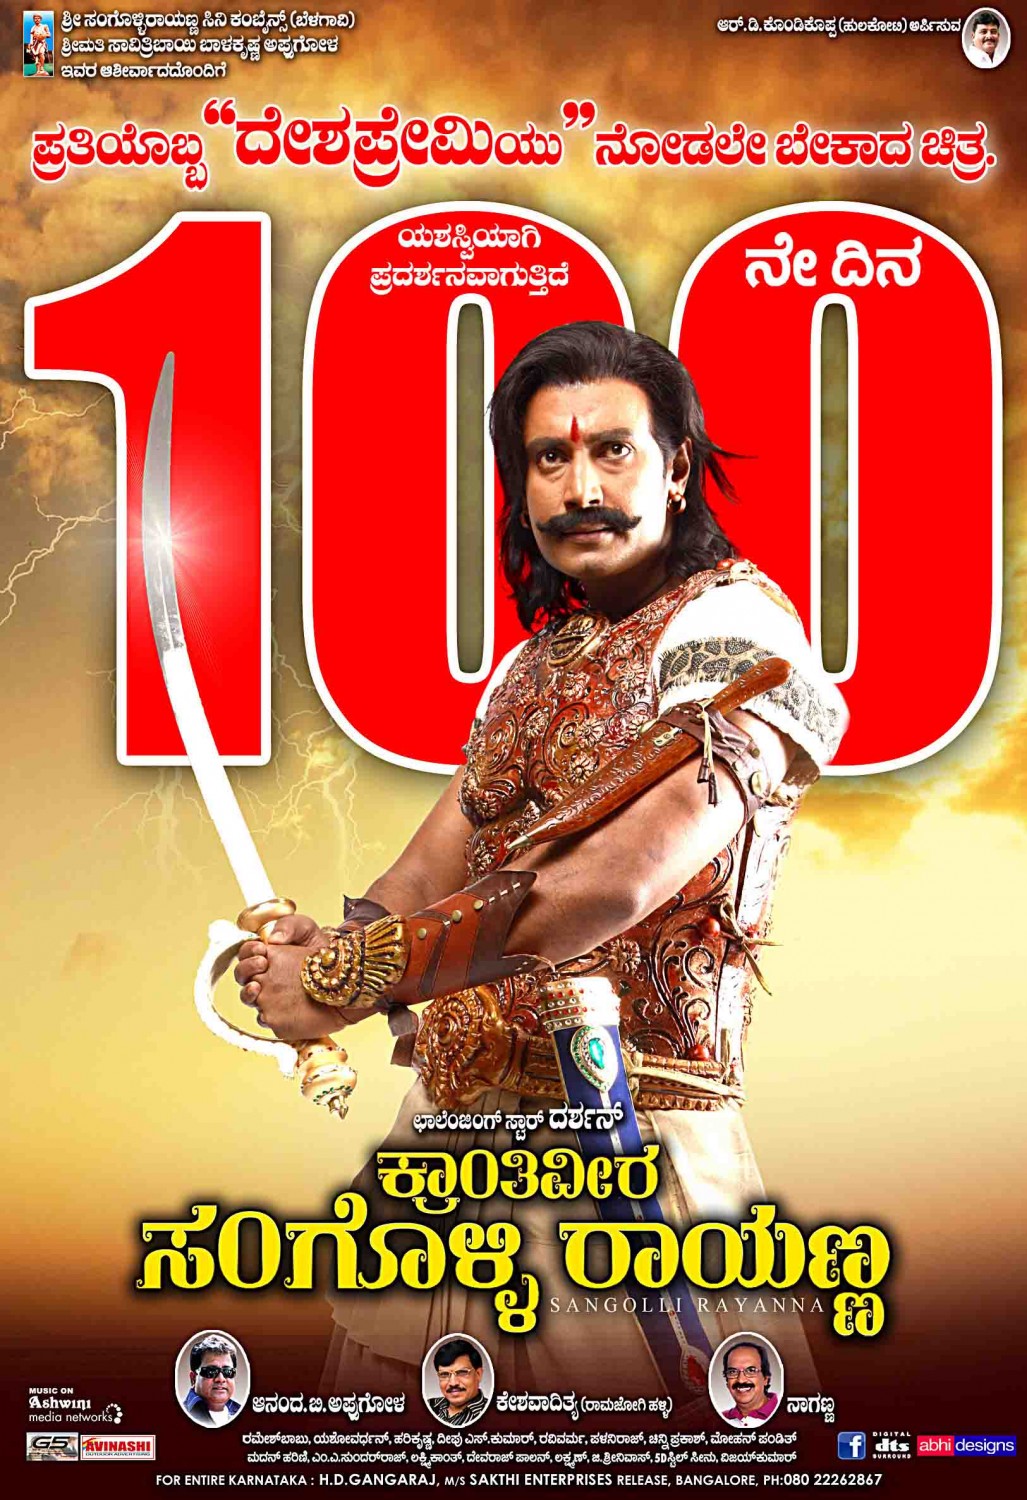 Extra Large Movie Poster Image for Sangolli Rayanna (#68 of 79)